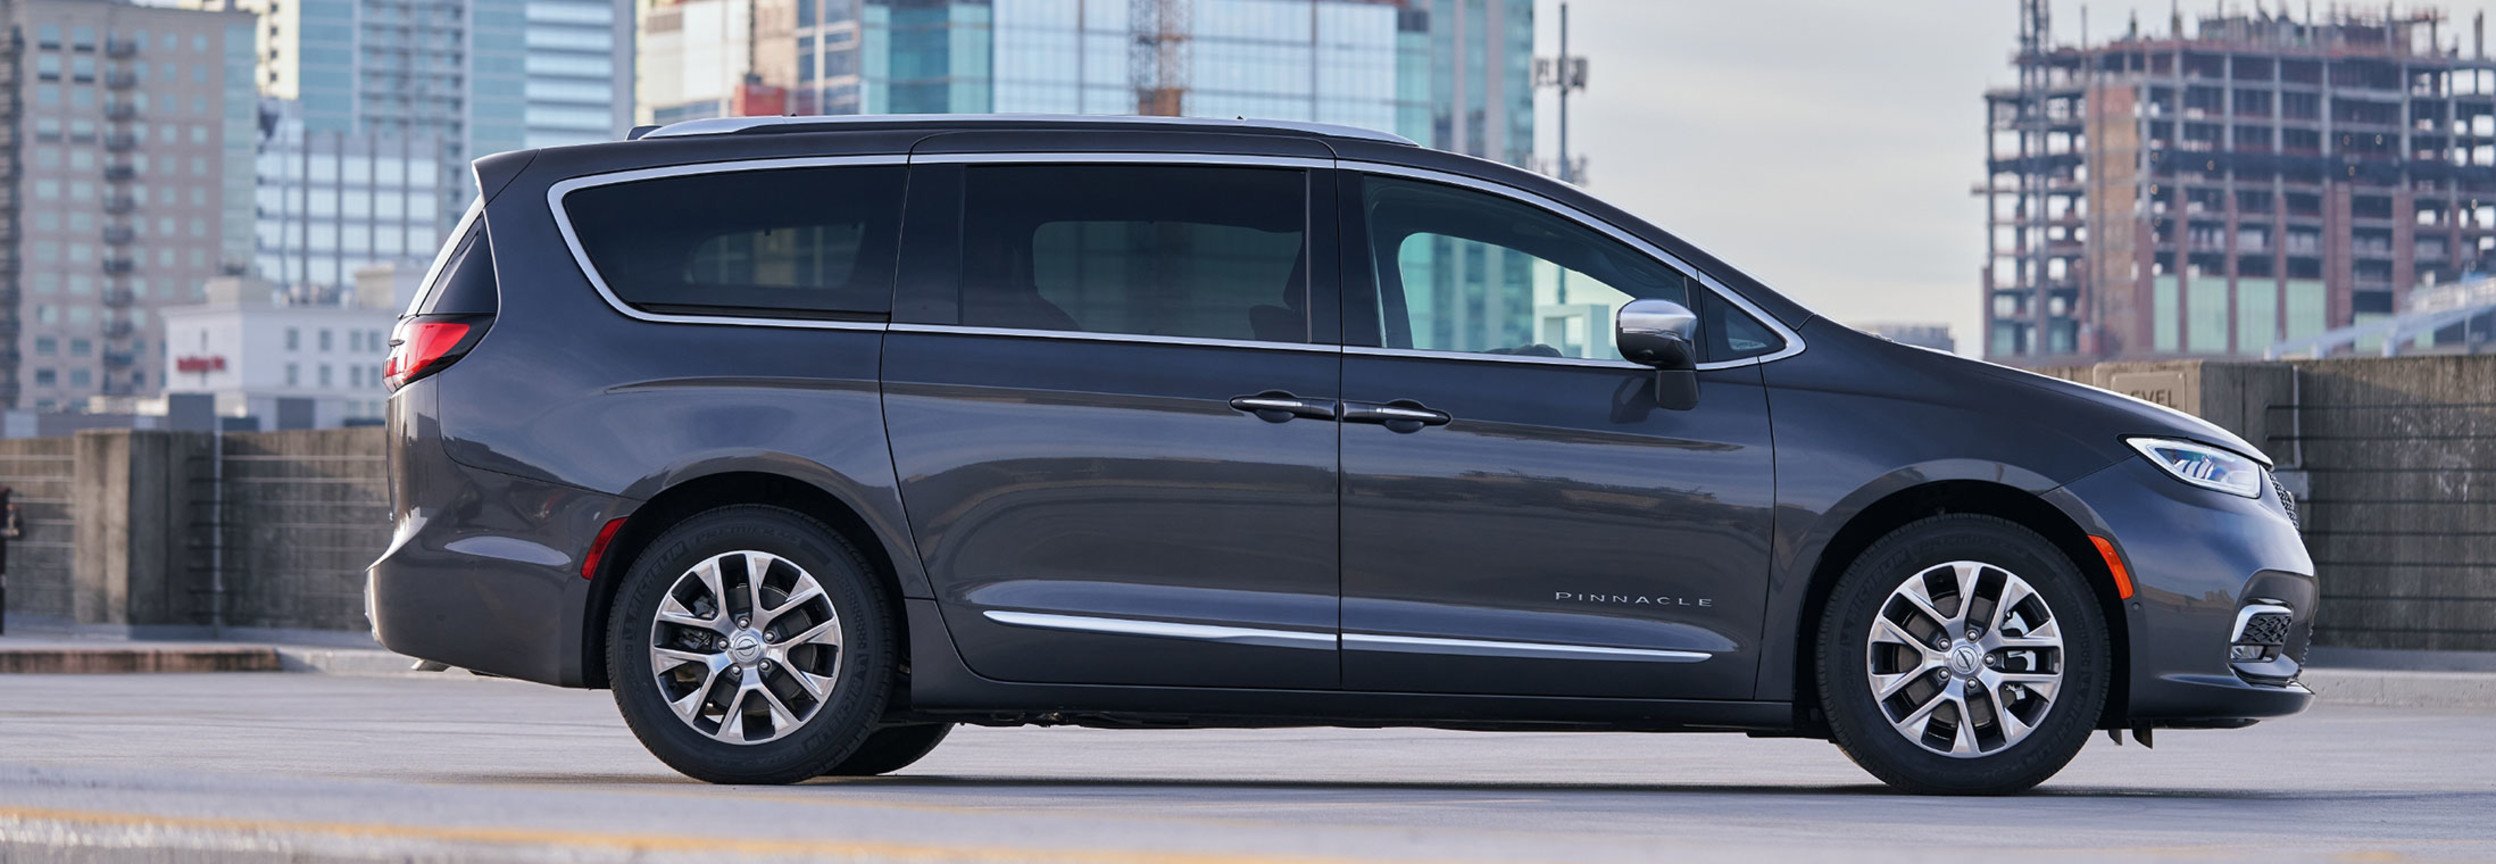 Chrysler Pacifica exterior - Side Profile